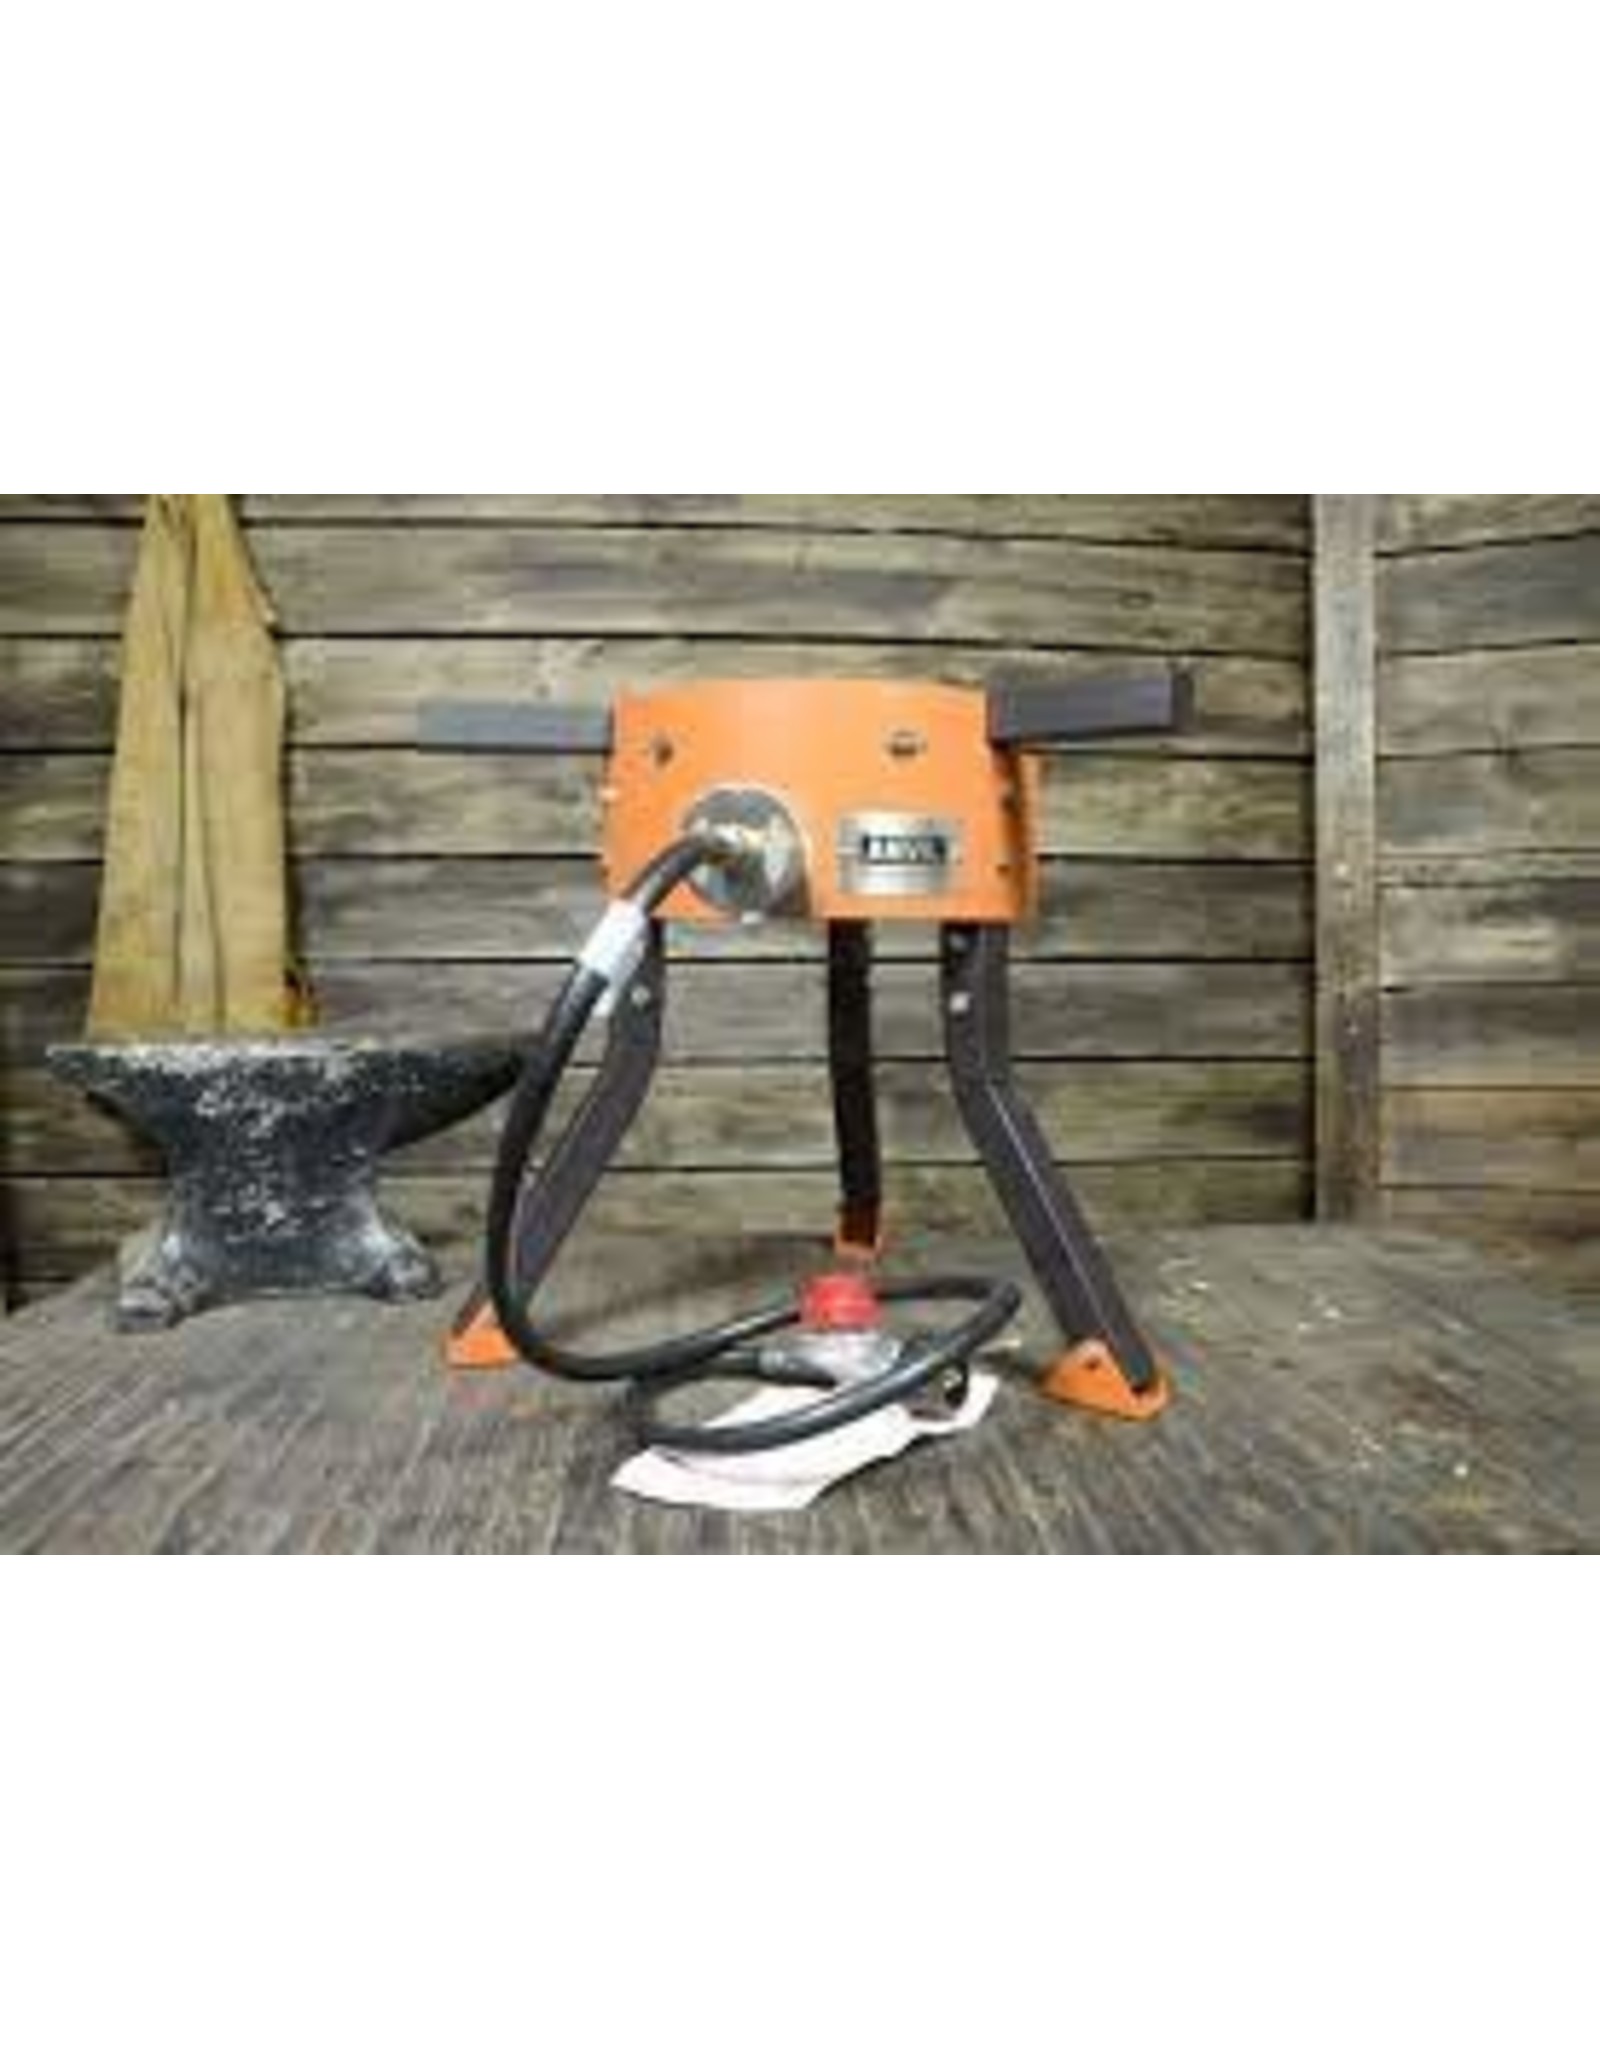 BLICHMANN ANVIL FORGE BURNER WITH LEG EXTENSIONS